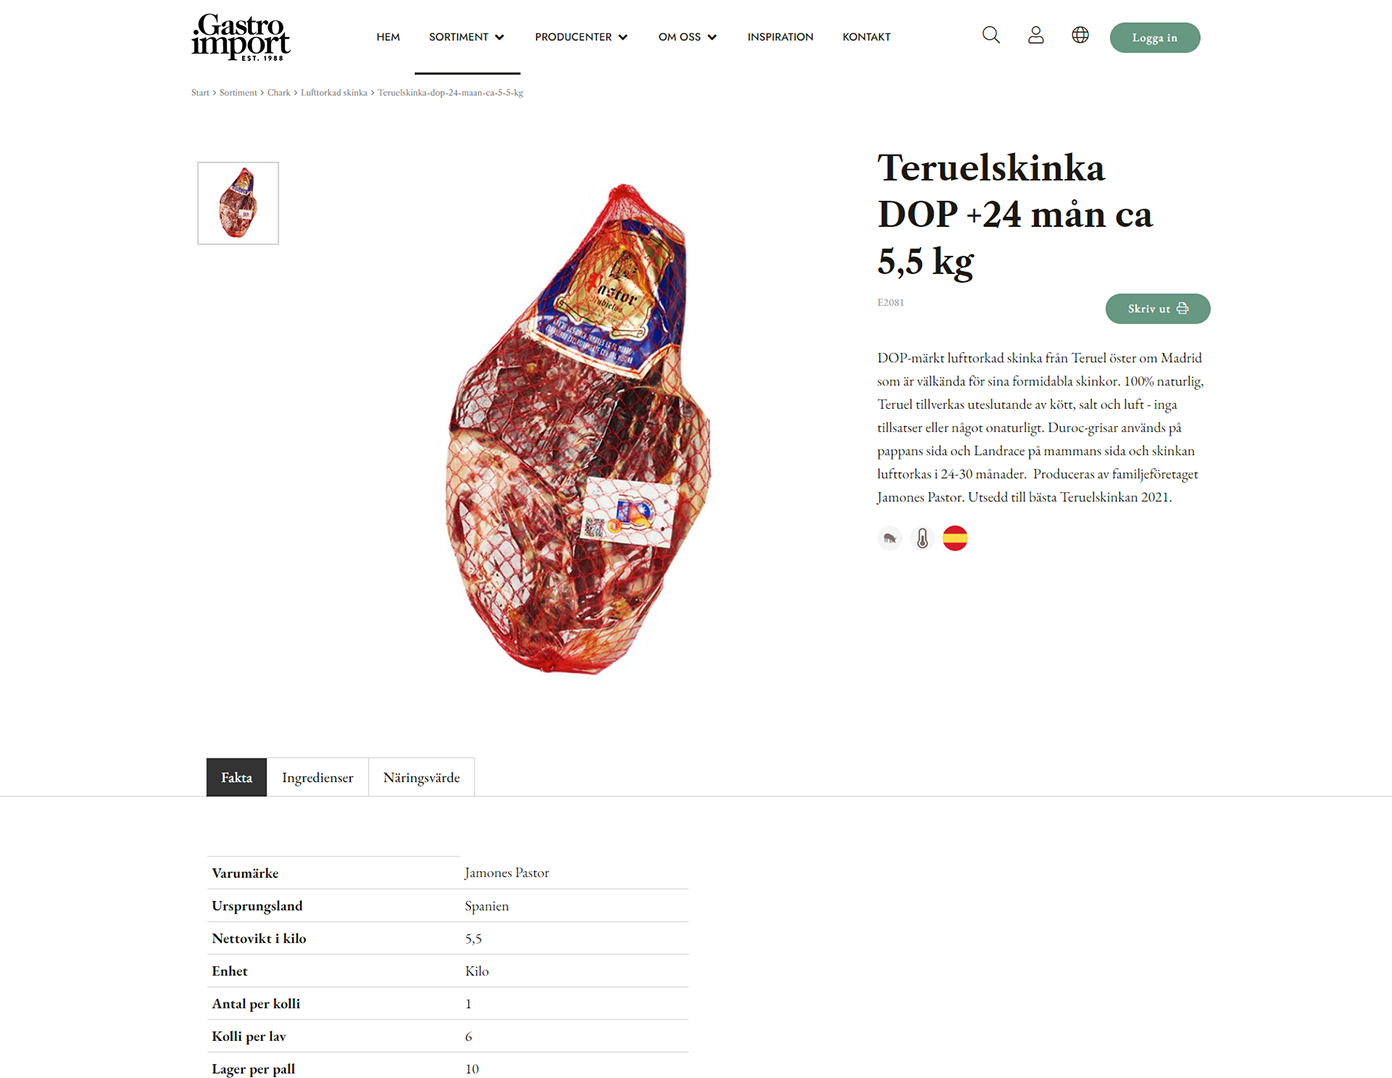 Gastro Import Product Page